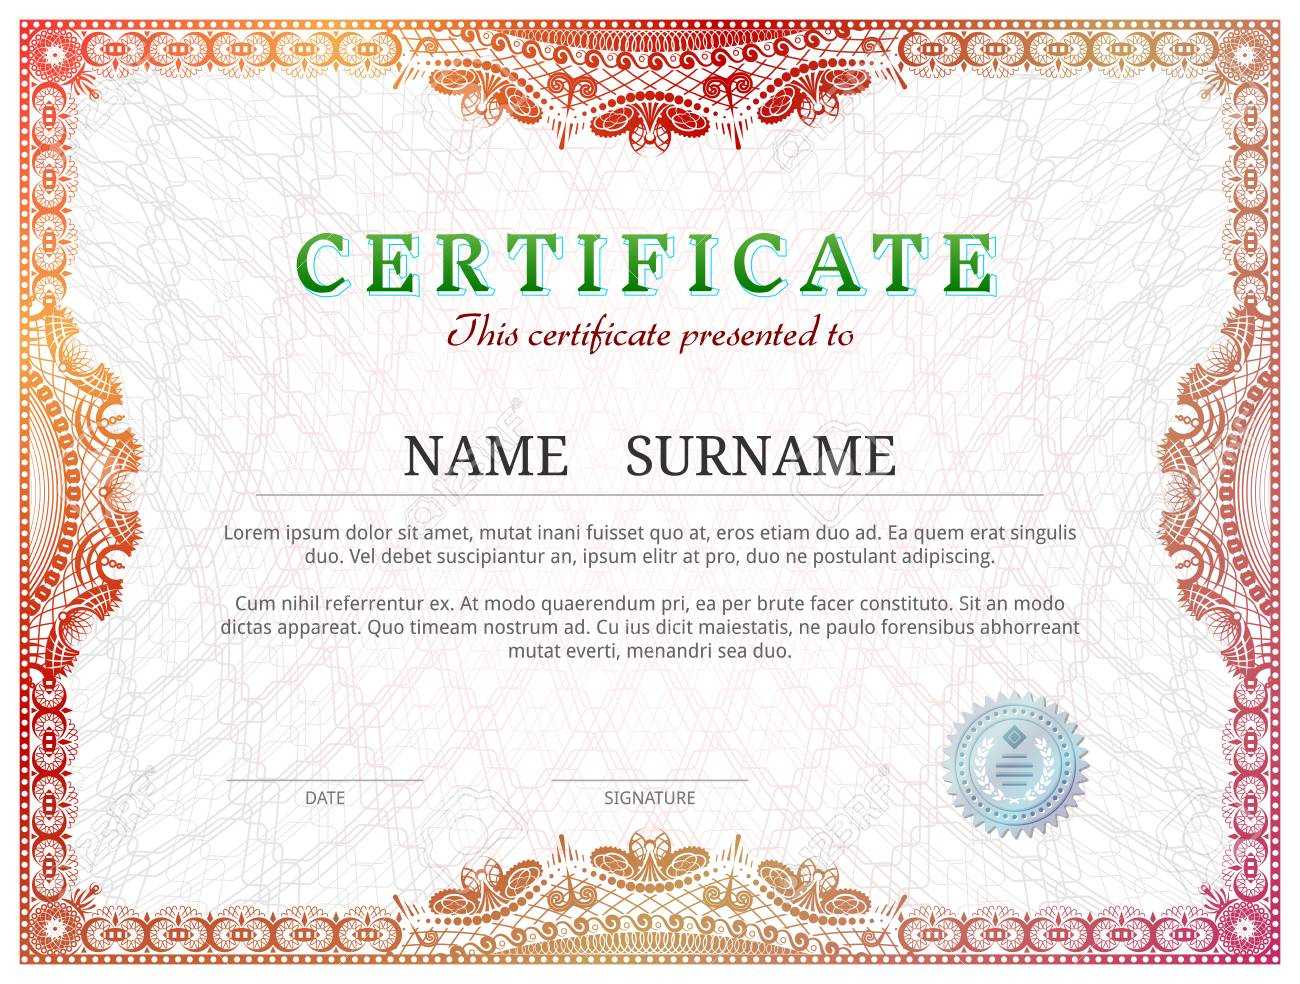 Certificate Template With Guilloche Elements. Red Diploma Border.. With Validation Certificate Template